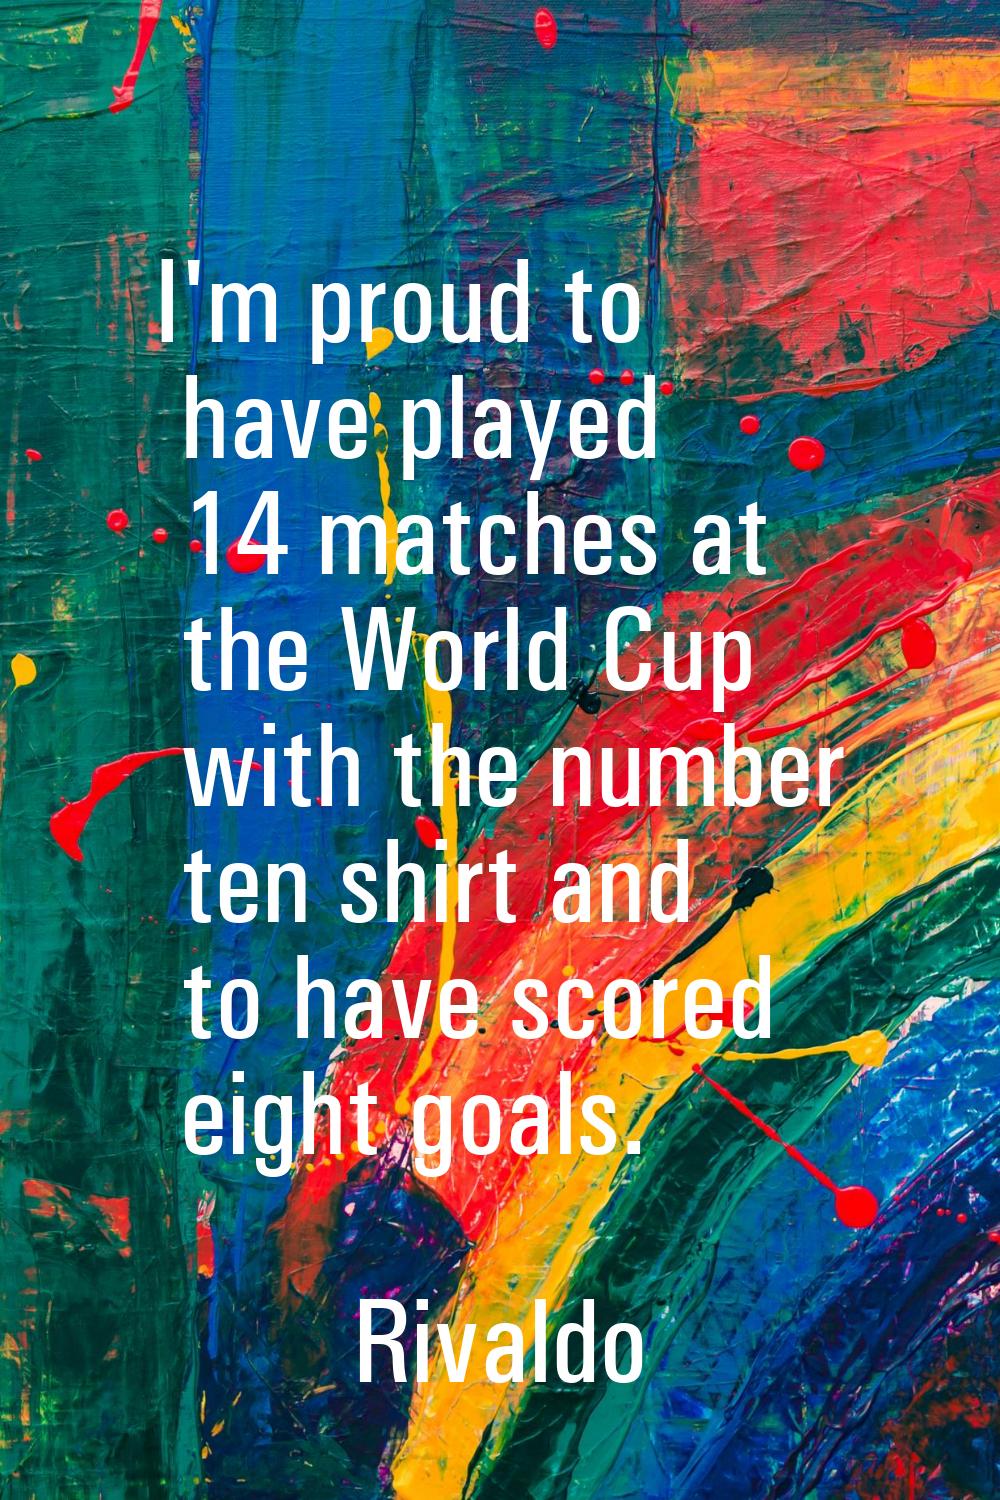 I'm proud to have played 14 matches at the World Cup with the number ten shirt and to have scored e